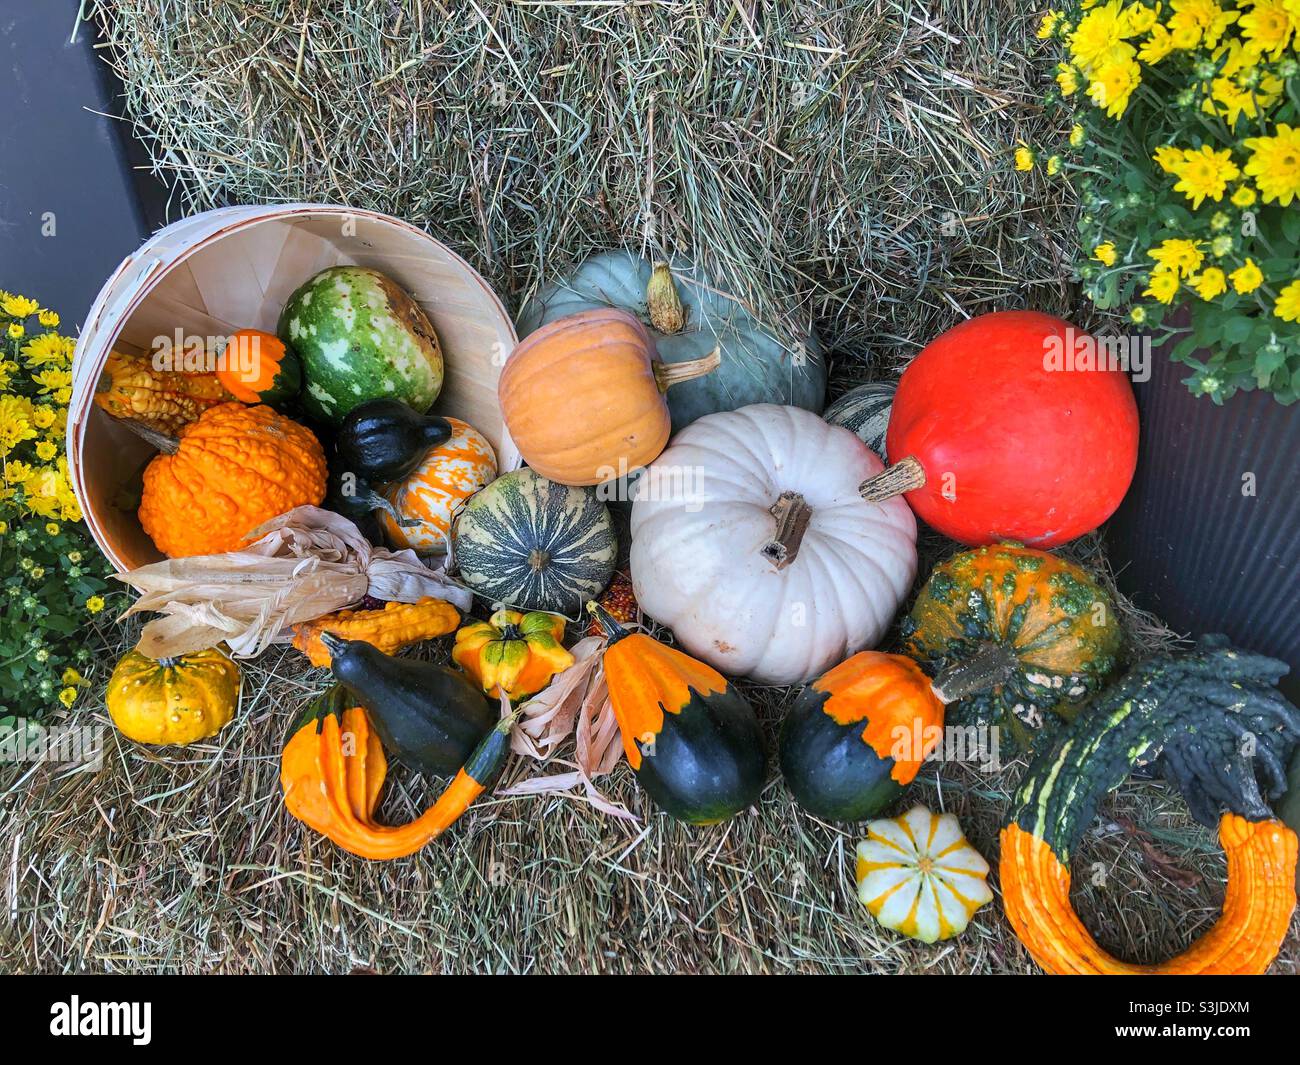 Colourful display of autumnal harvest. Stock Photo